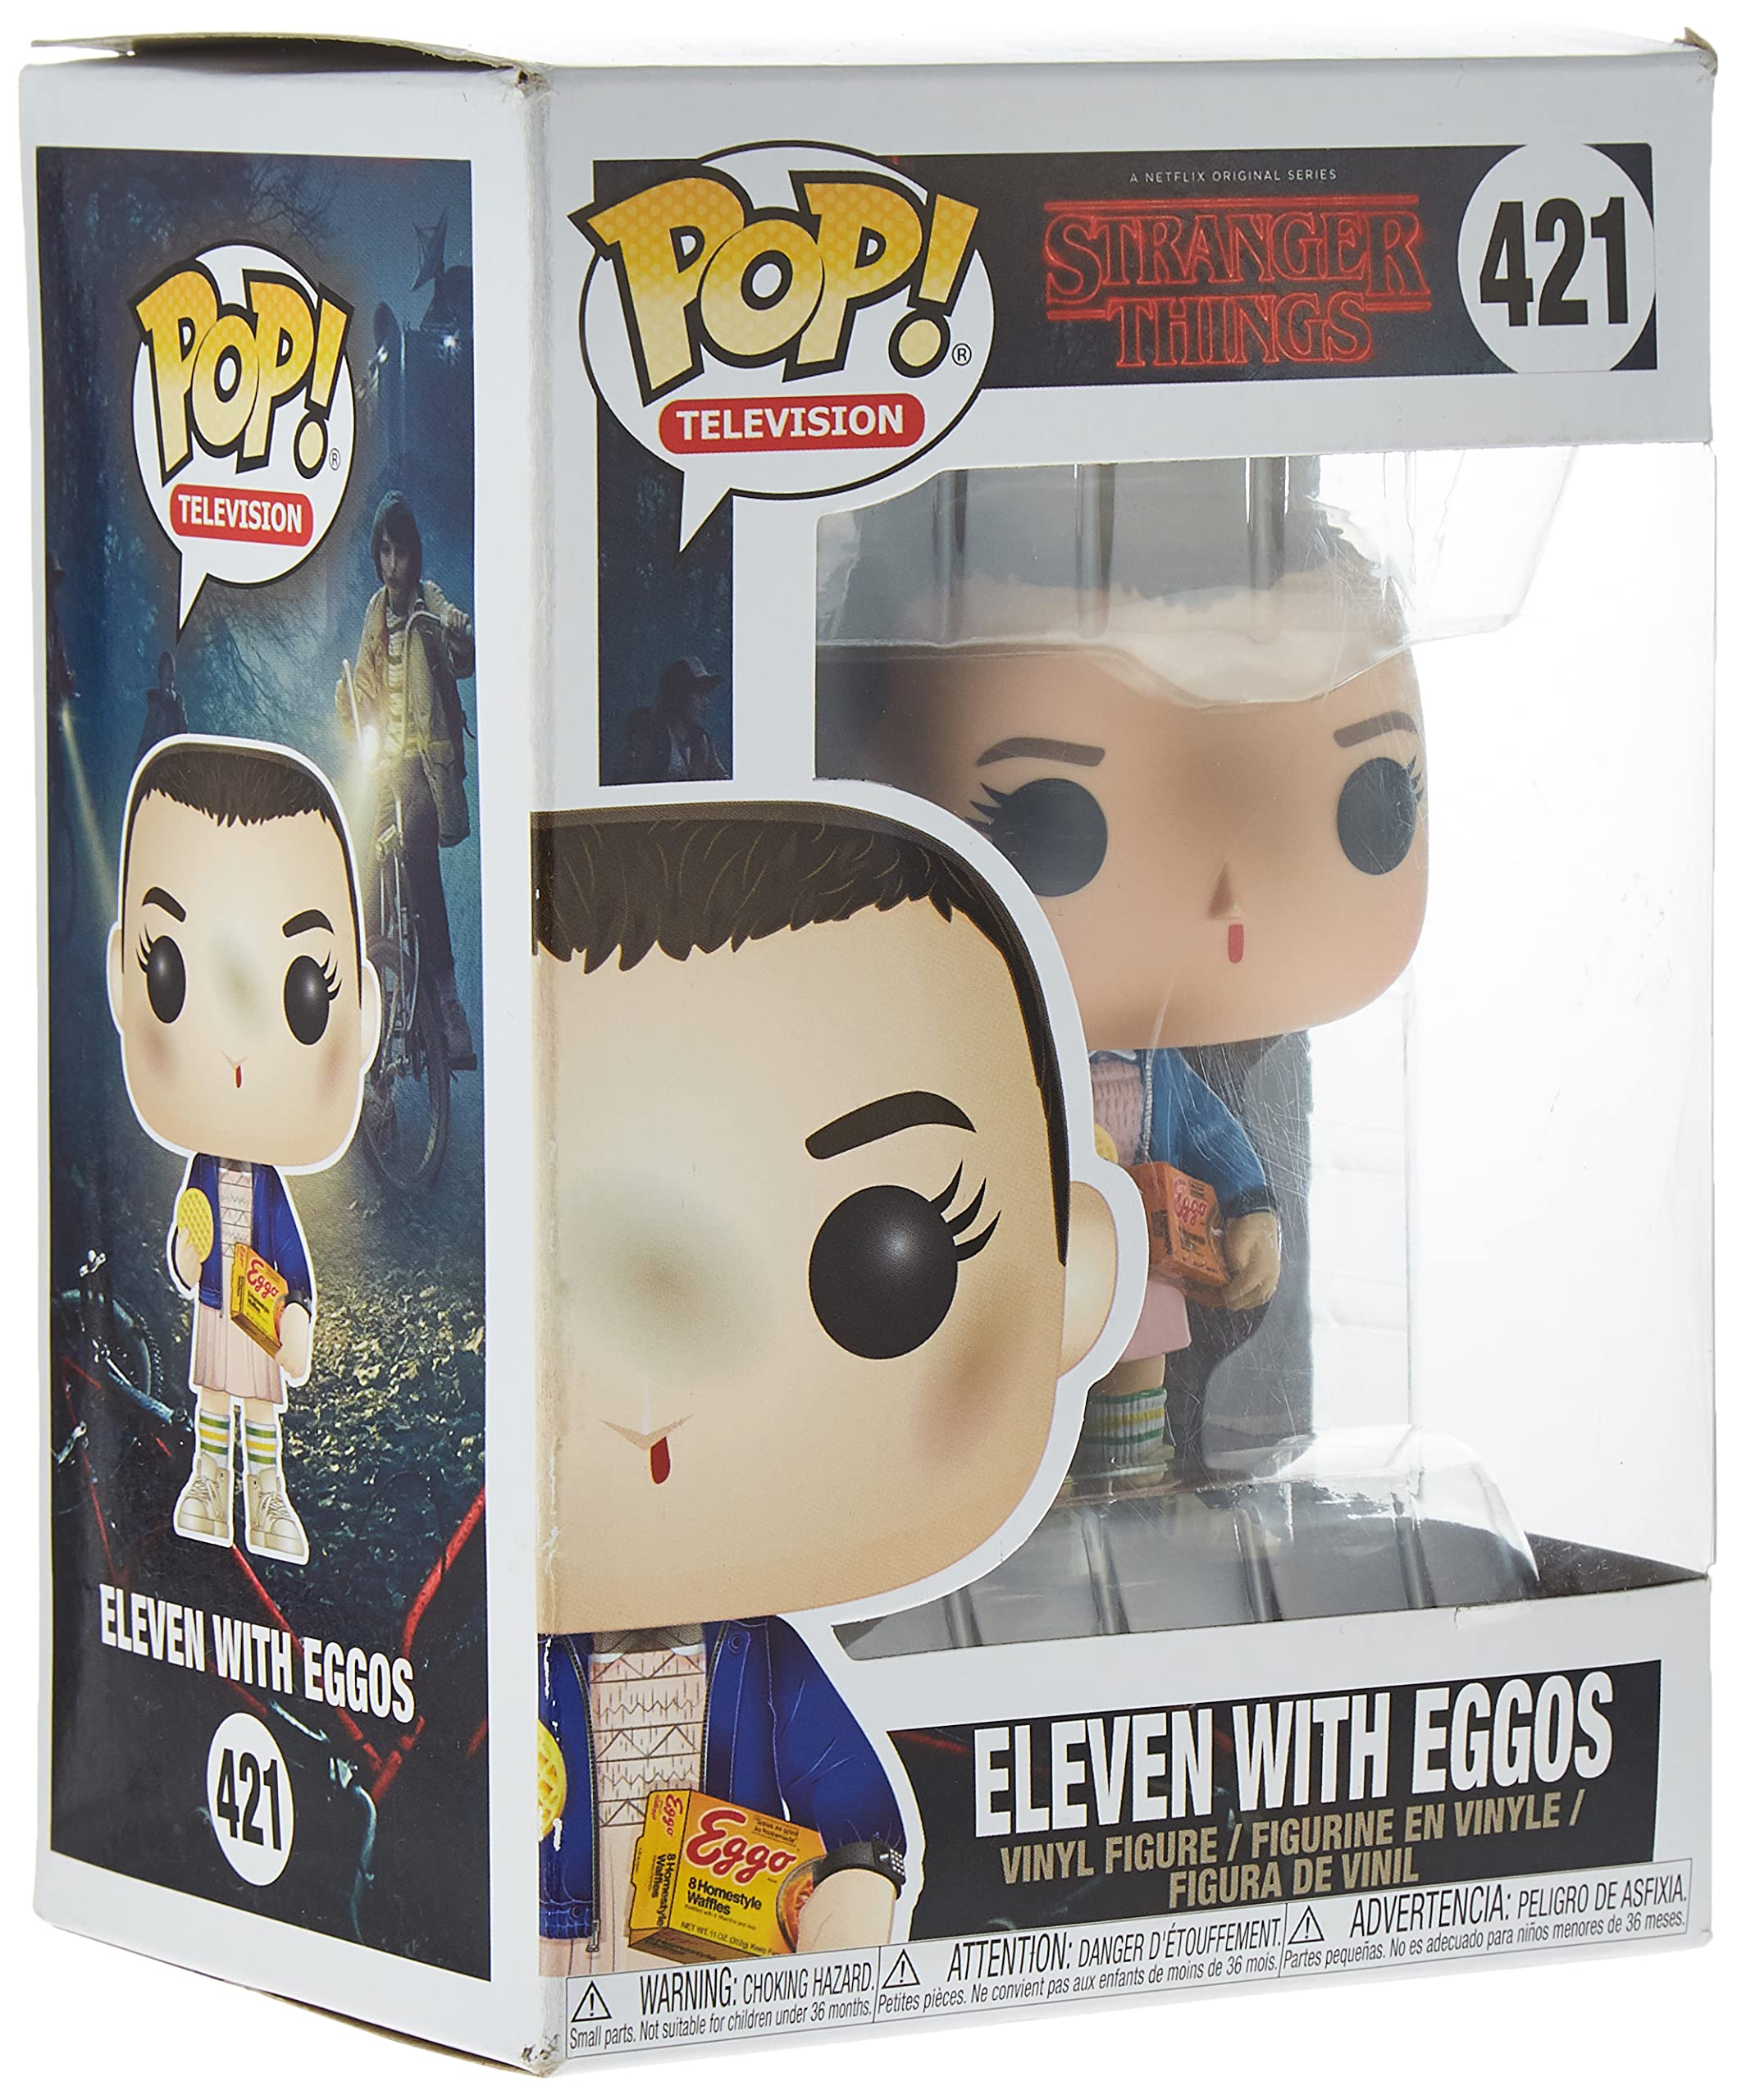 Funko POP Stranger Things Eleven with Eggos Vinyl Figure, Styles May Vary - with/Without Blonde Wig,Multicolor,Standard,13318